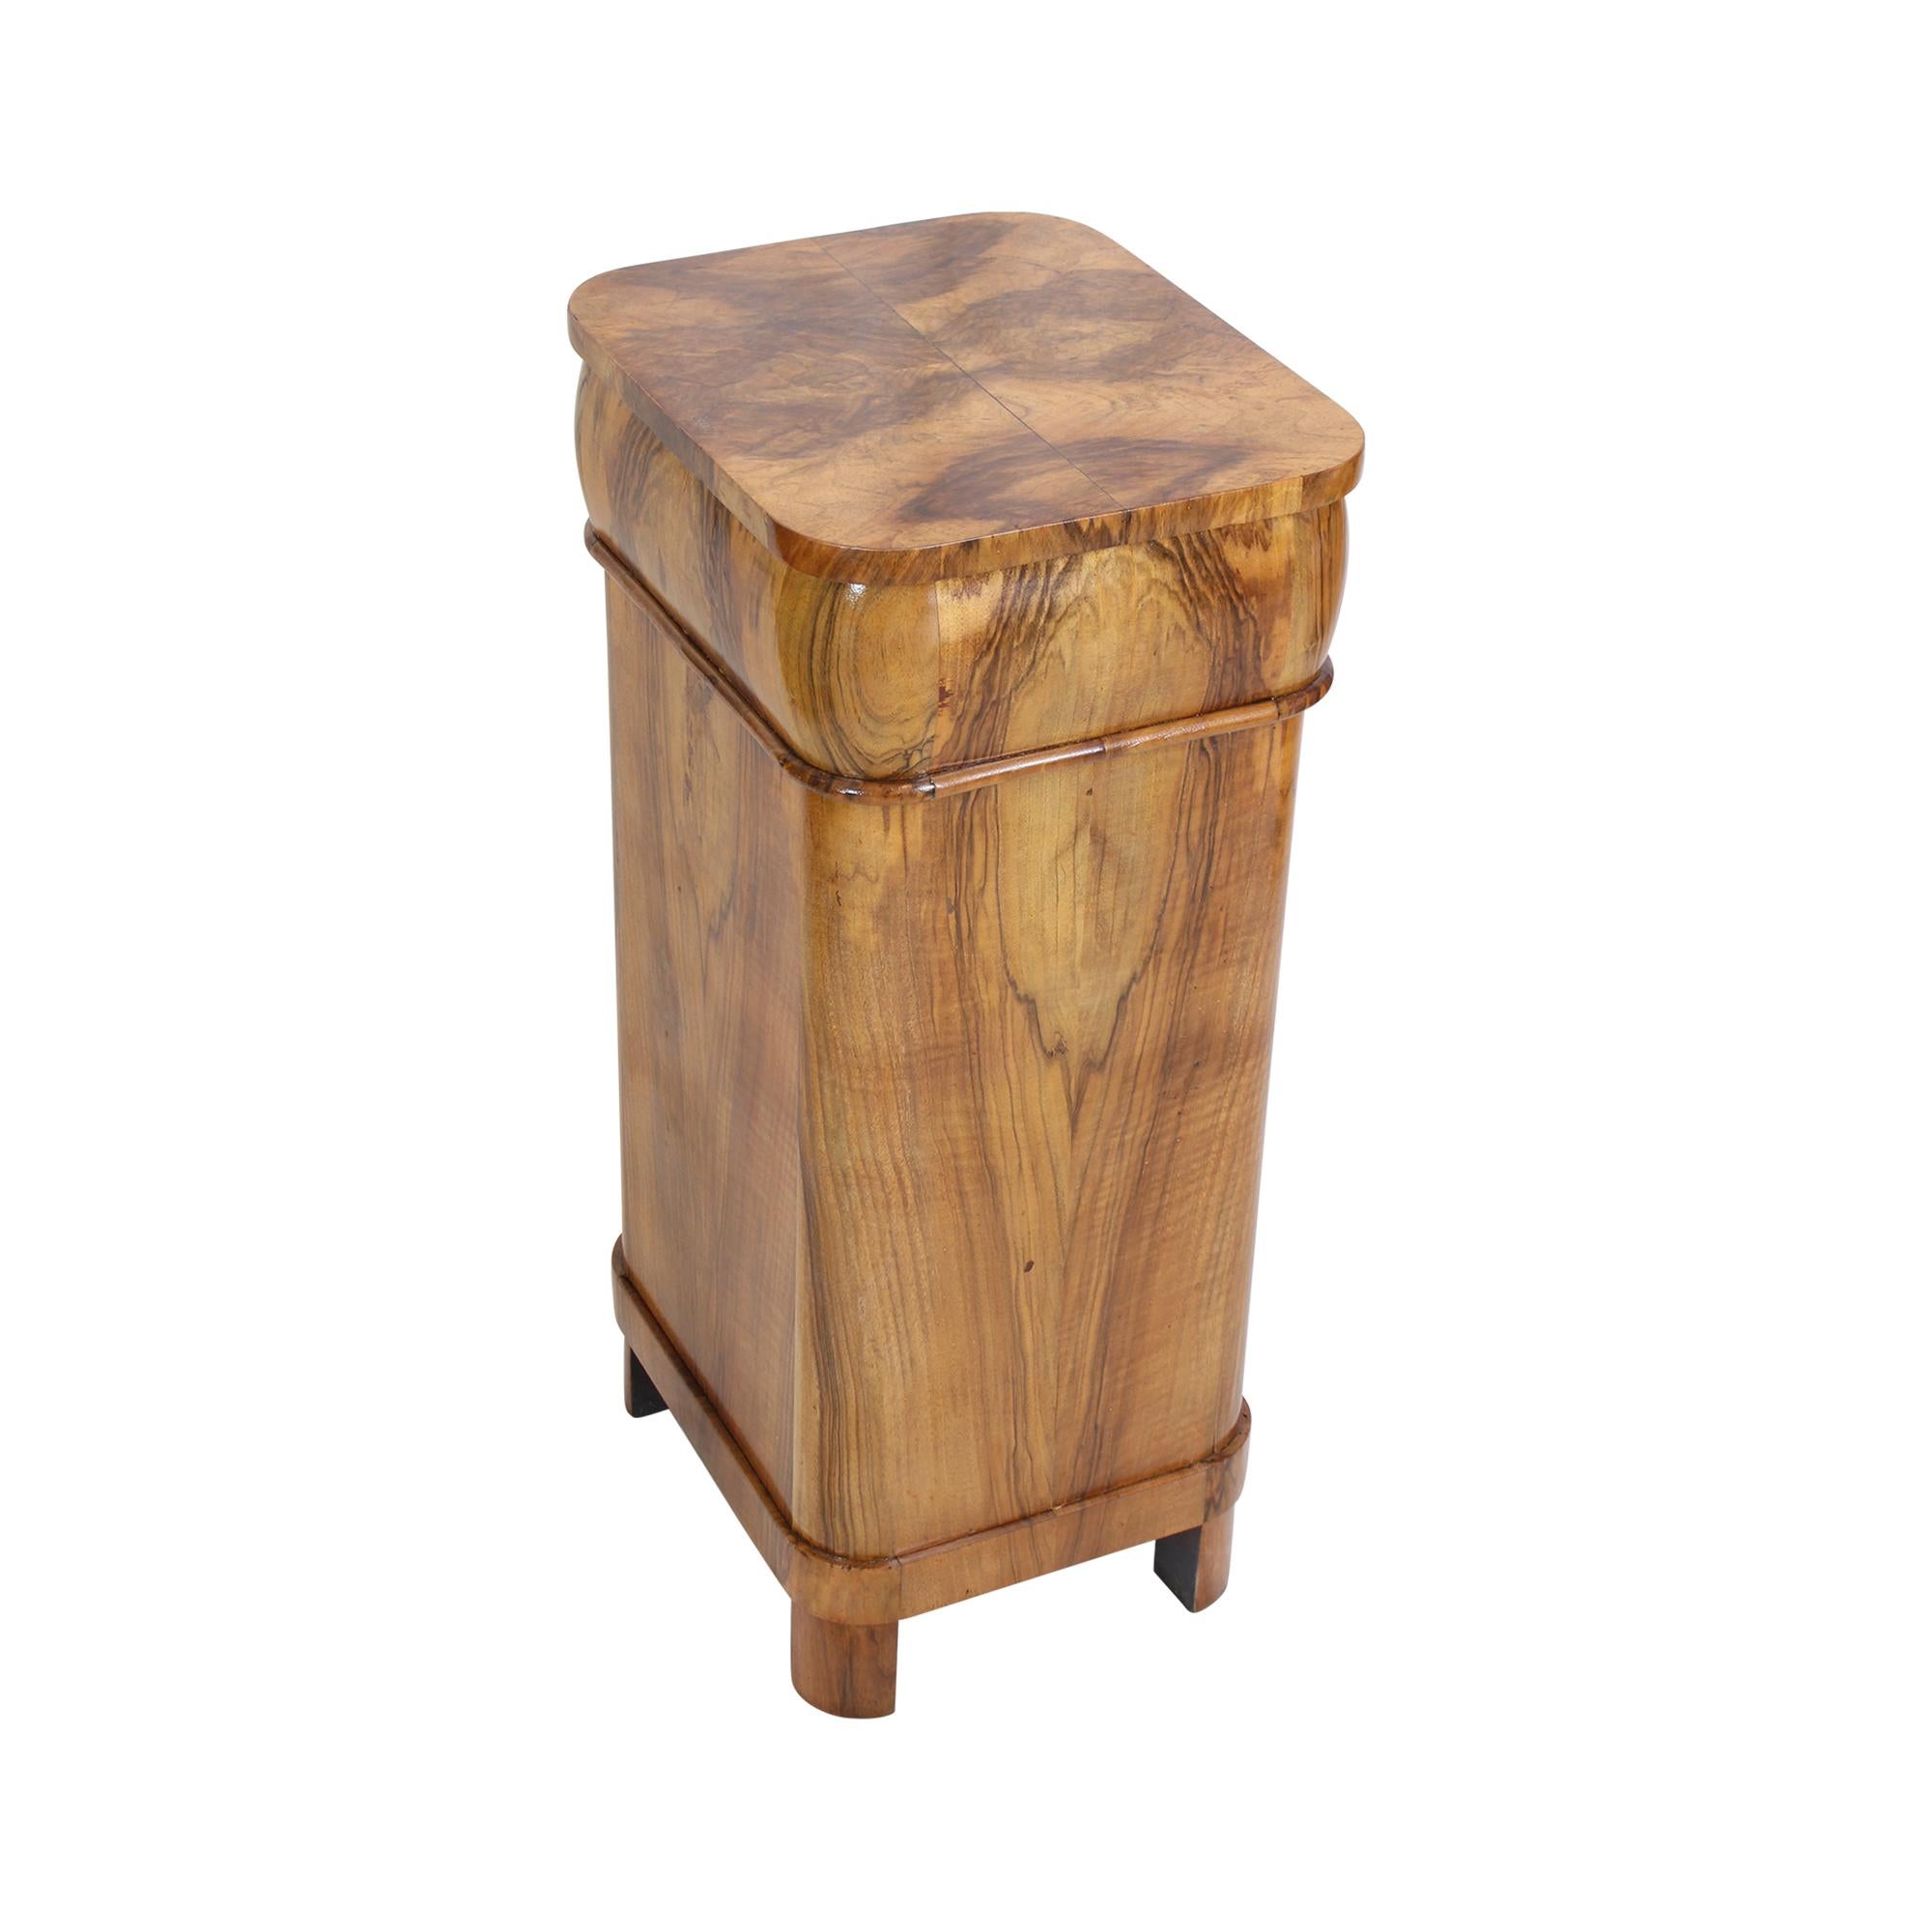 Beautiful Biedermeier walnut veneer bedside table or column cabinet from Germany. All around with very nice walnut veneer and a beautiful veneer picture. The opening handles are made of brass. There is a drawer at the top and a door at the bottom.